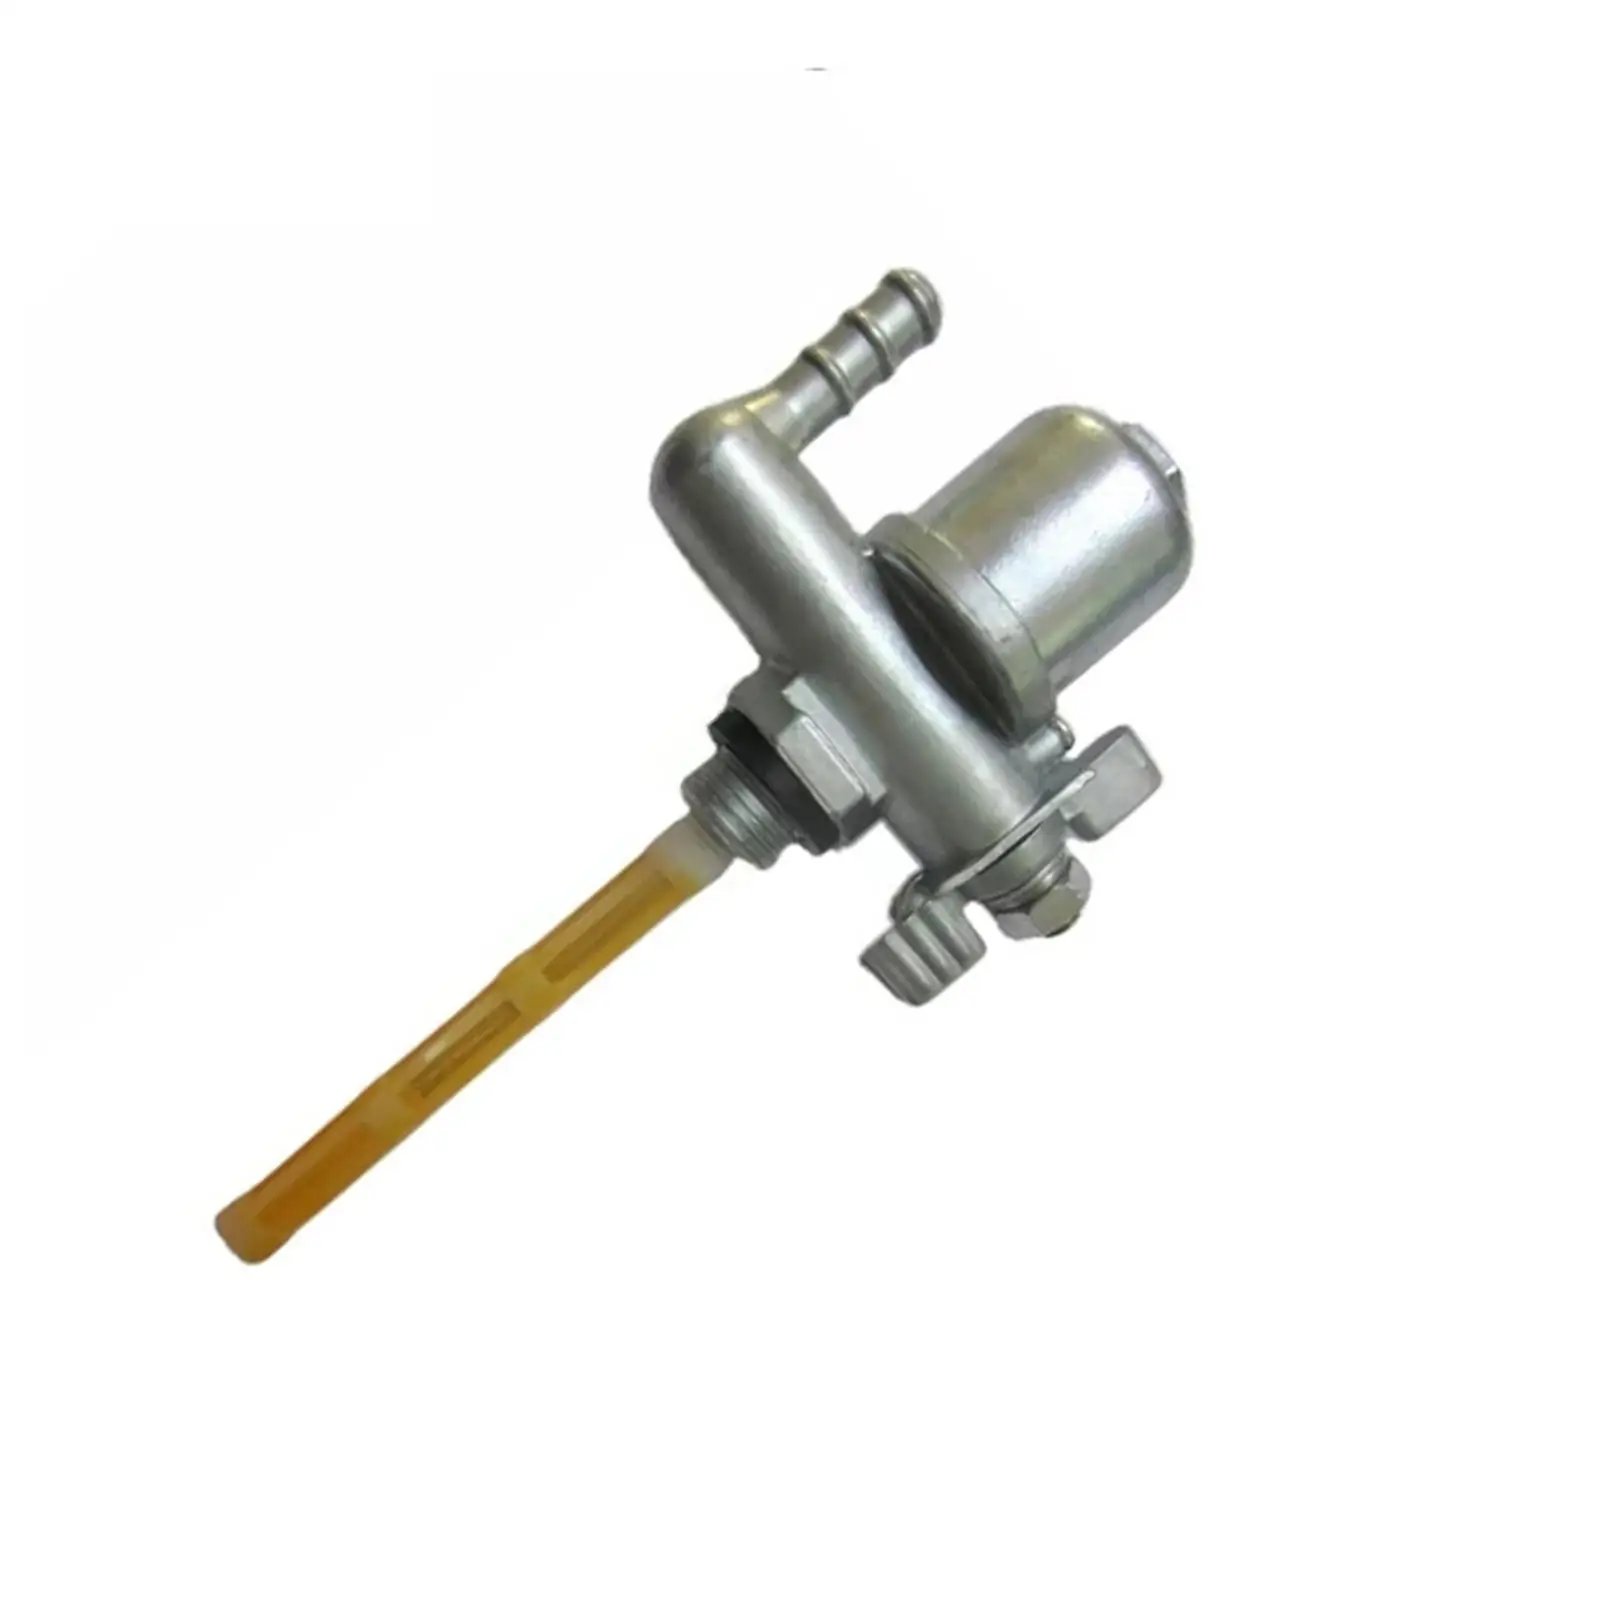 Fuel Gas Tank Switch Valve Petcock Replace for Ruassia msk Motorcycle Parts